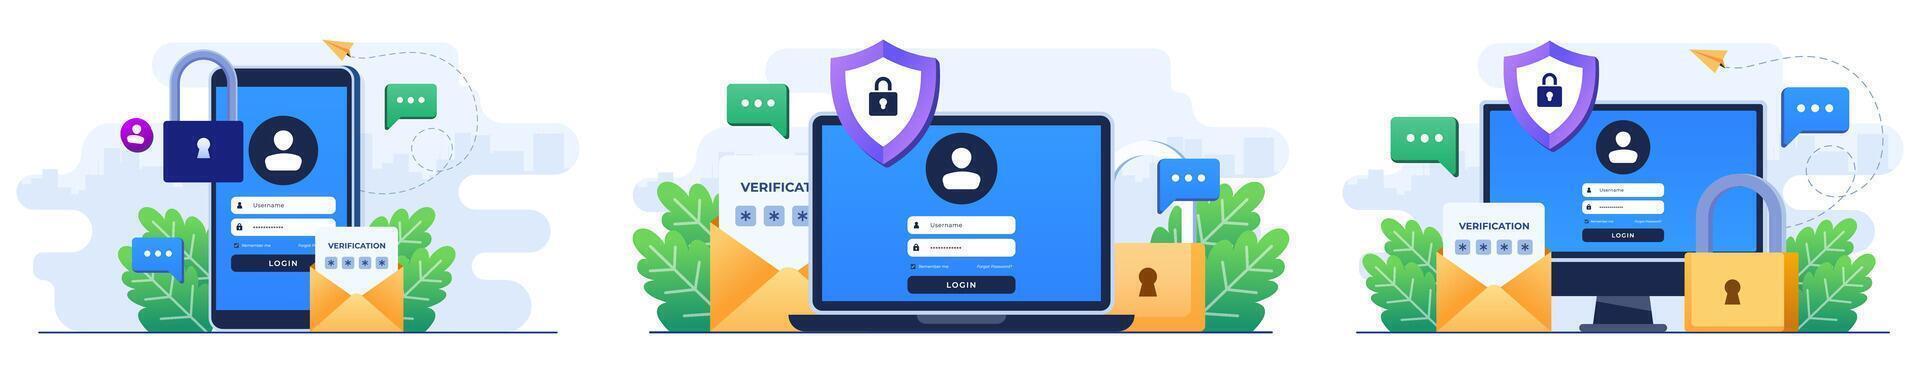 Set of flat illustrations of two-step verification, OTP, Authentication password, One-time password for secure website account login, Login page on device screen vector